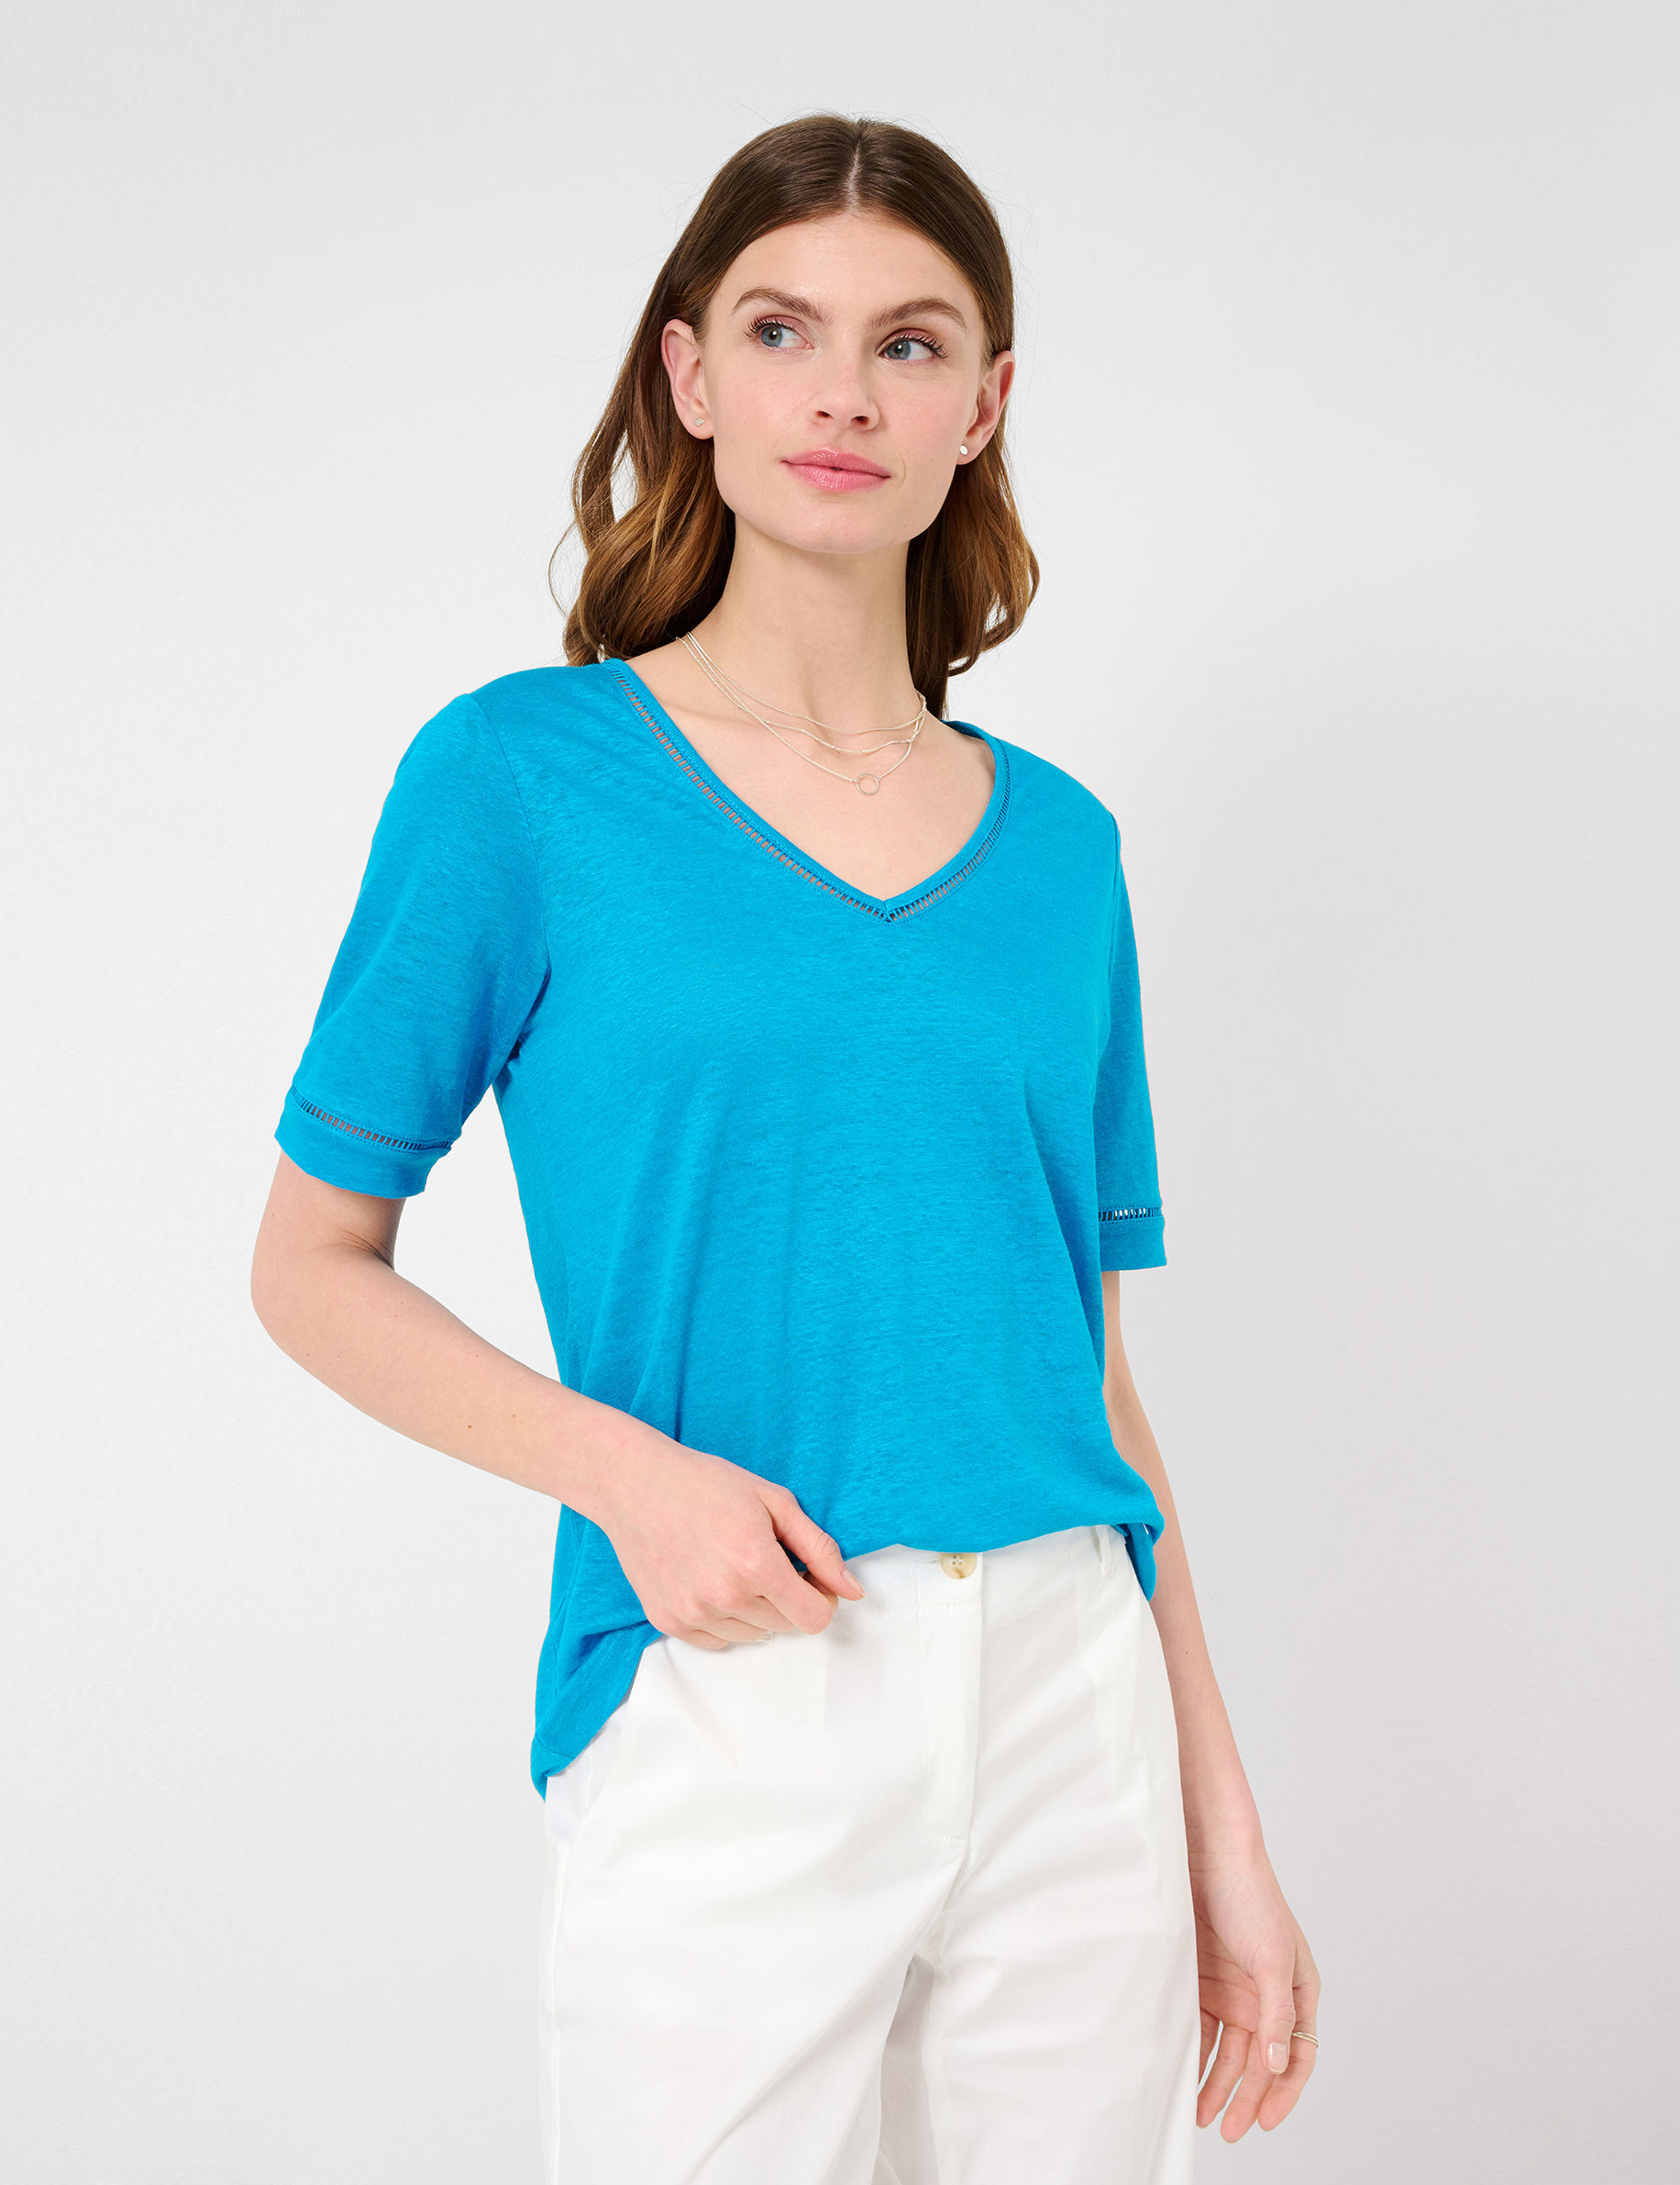 Shades of Blue, Women, Style CARRY, MODEL_FRONT_ISHOP